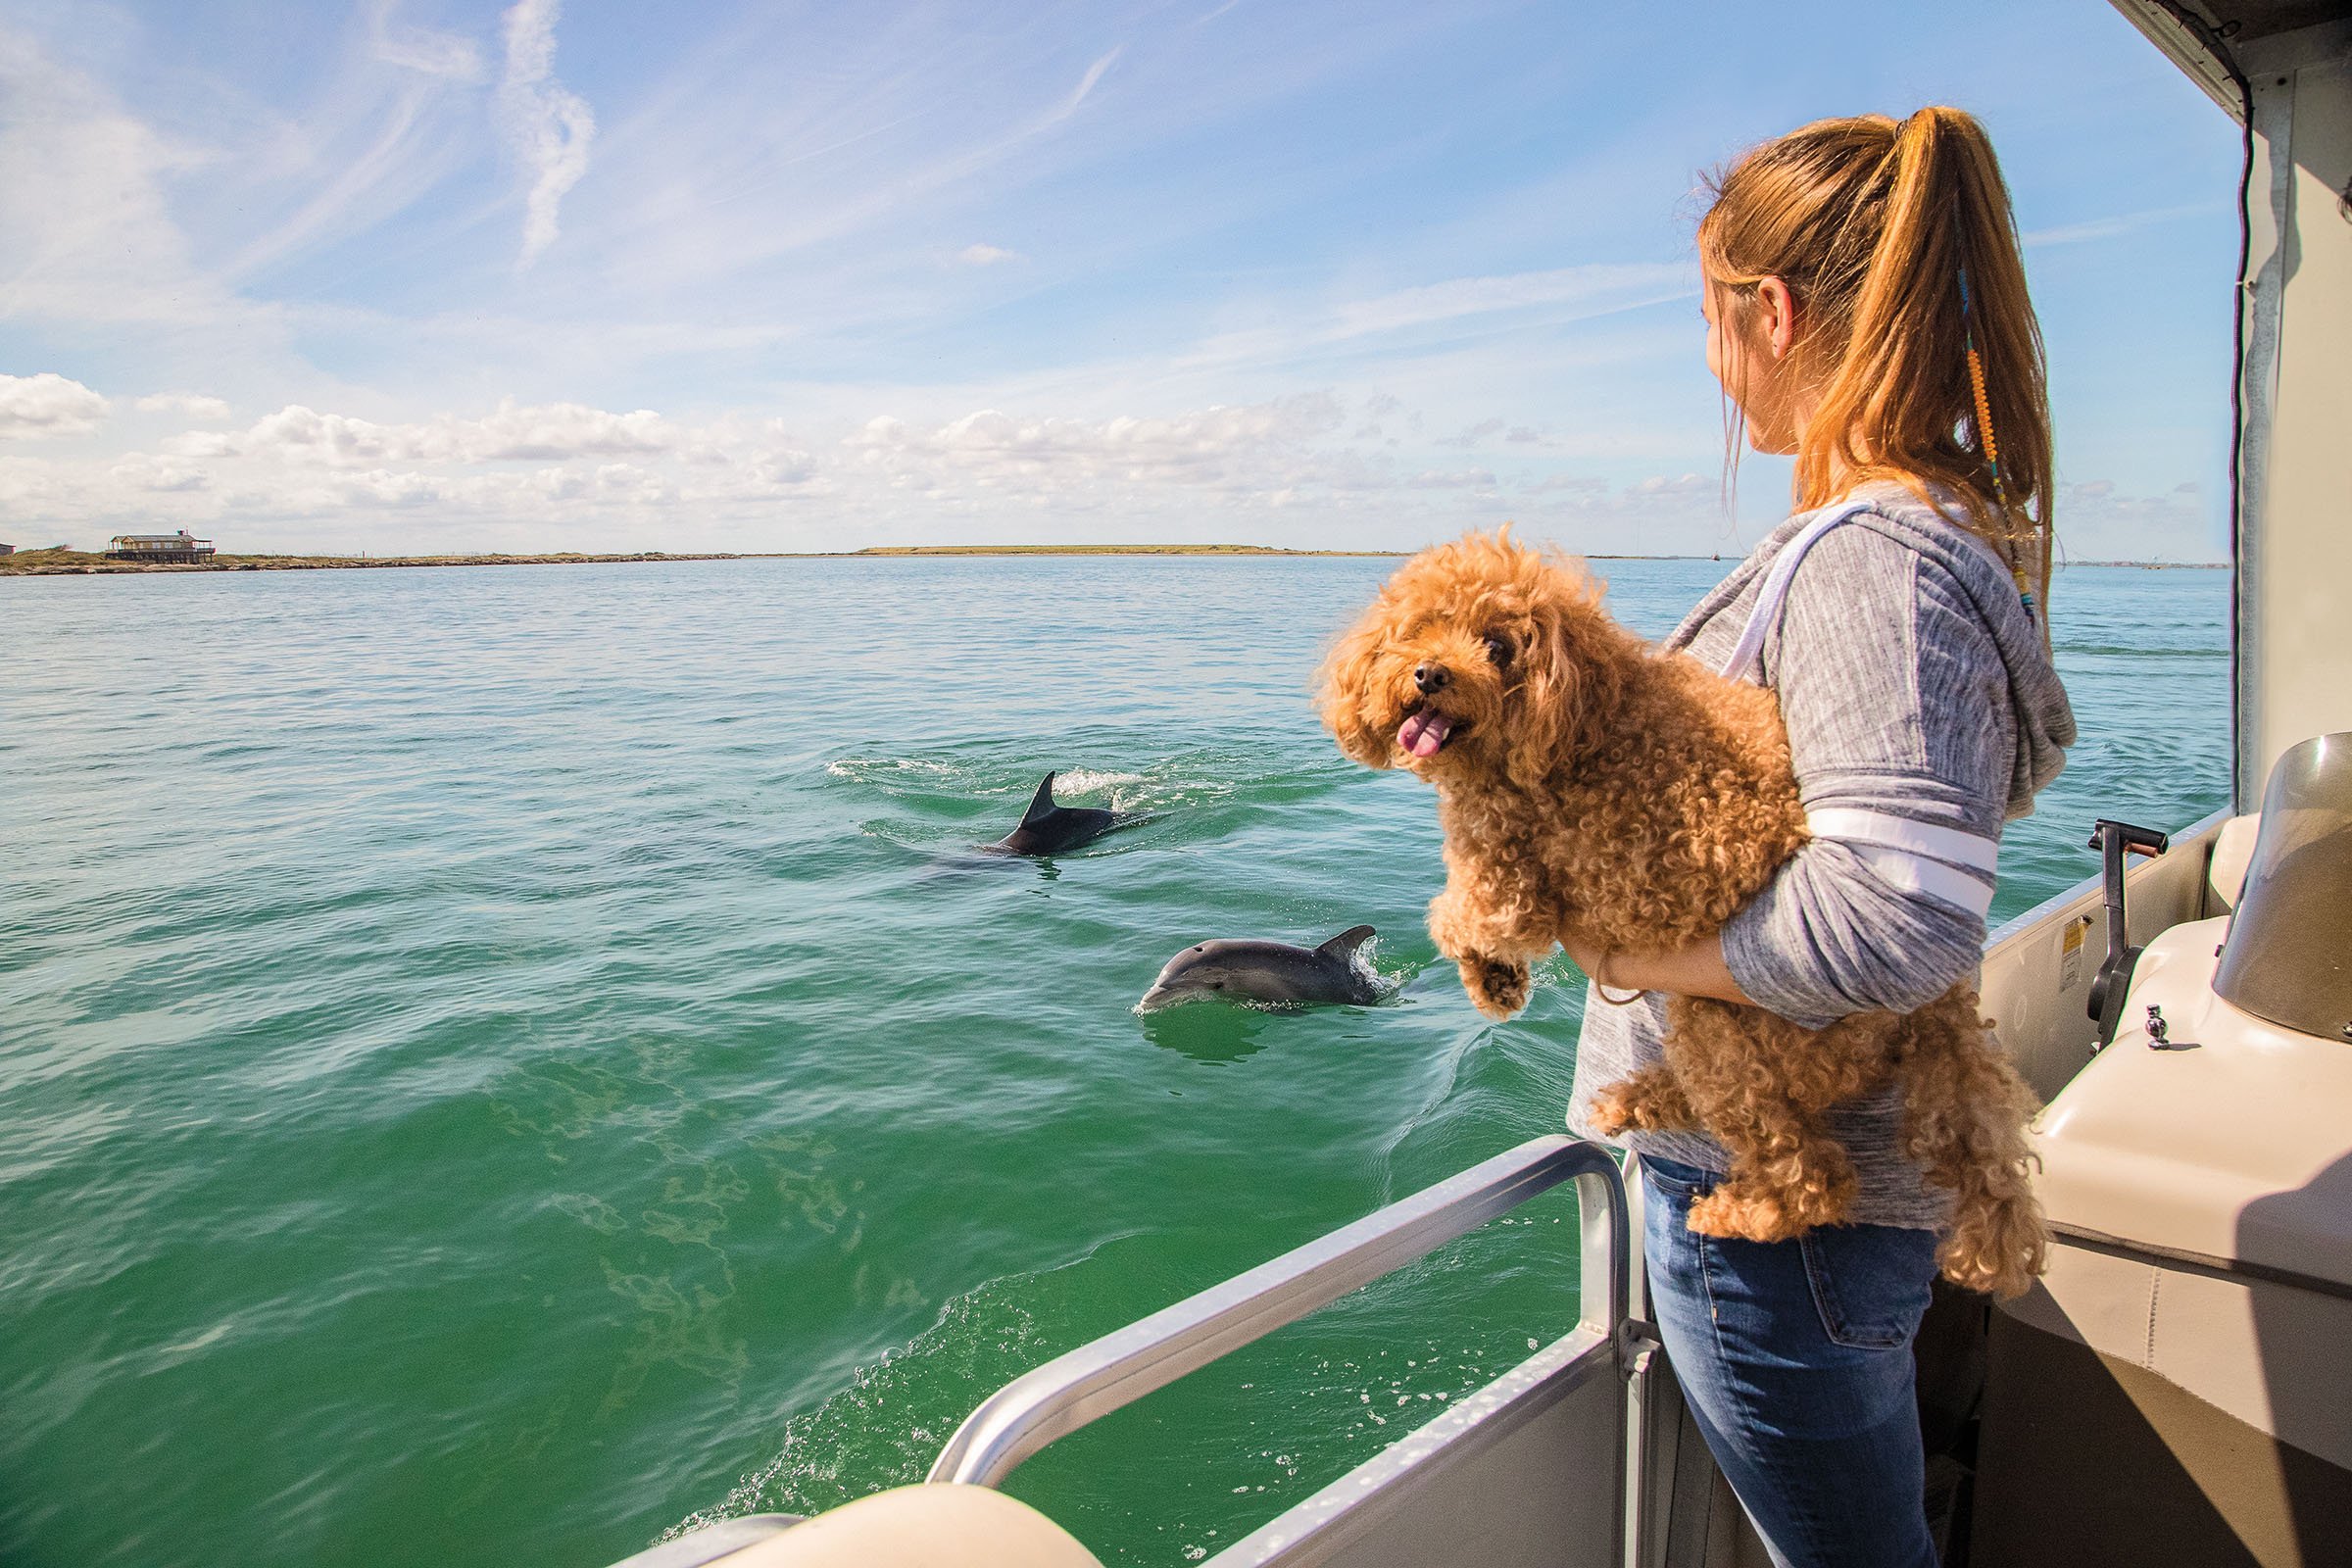 A woman holds a curly-haired golden dog off the side of a boat while dolphins swim by in clear water